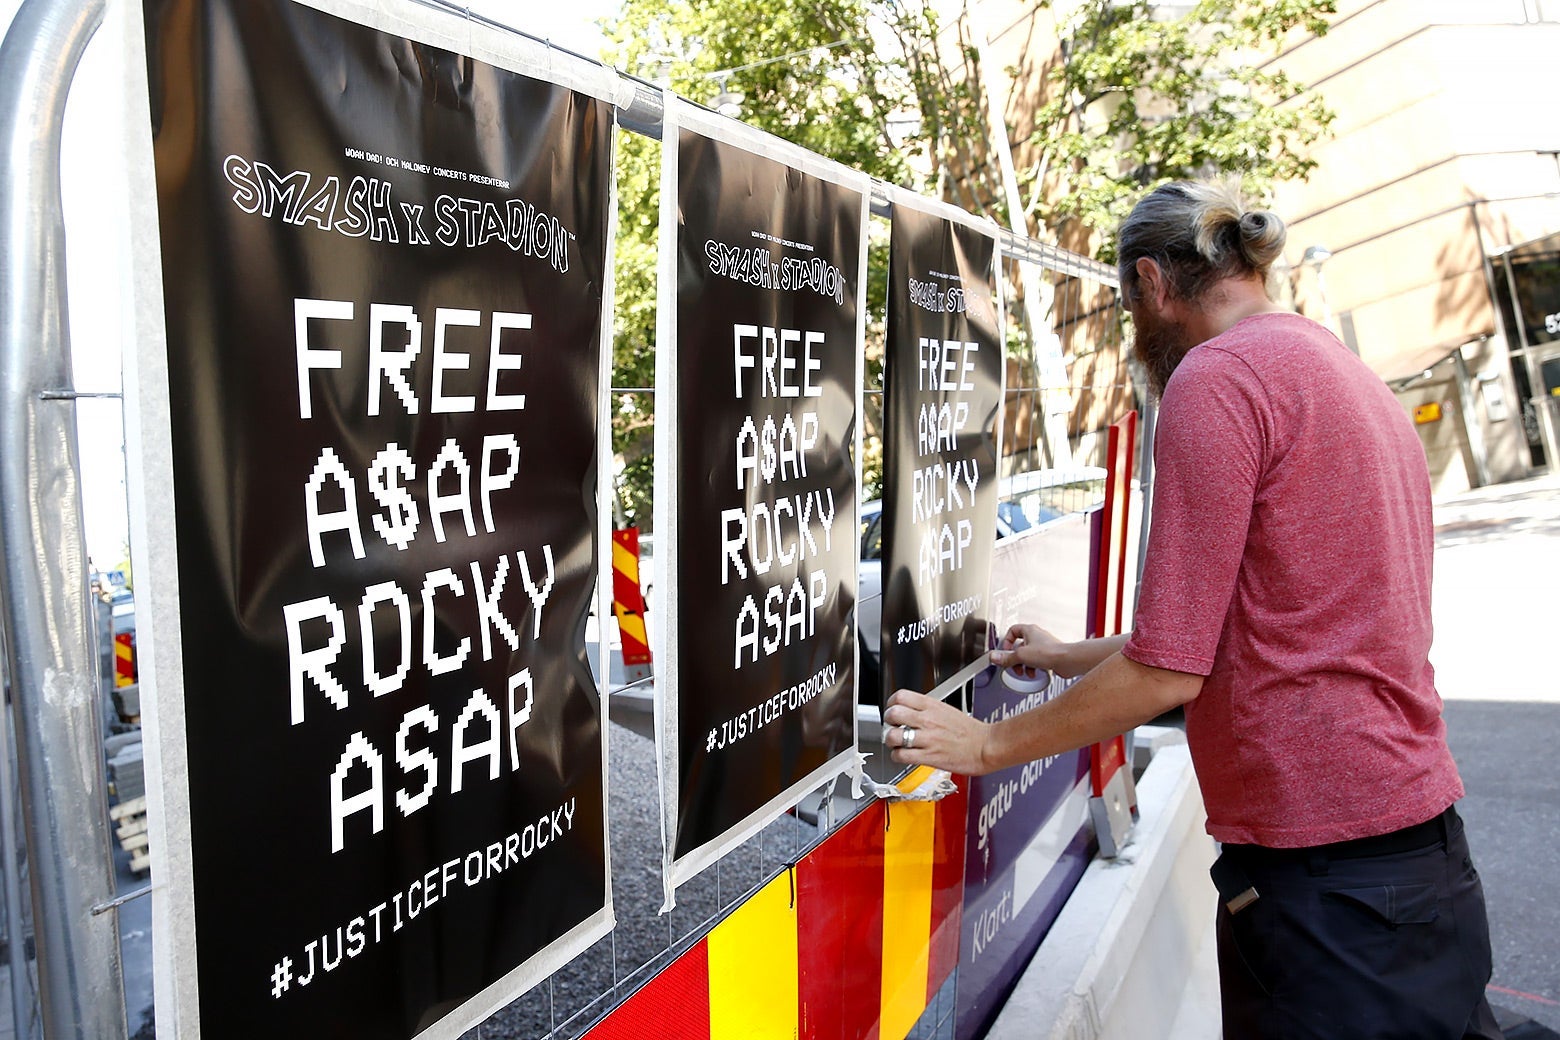 A man displays posters advocating for ASAP Rocky's release.